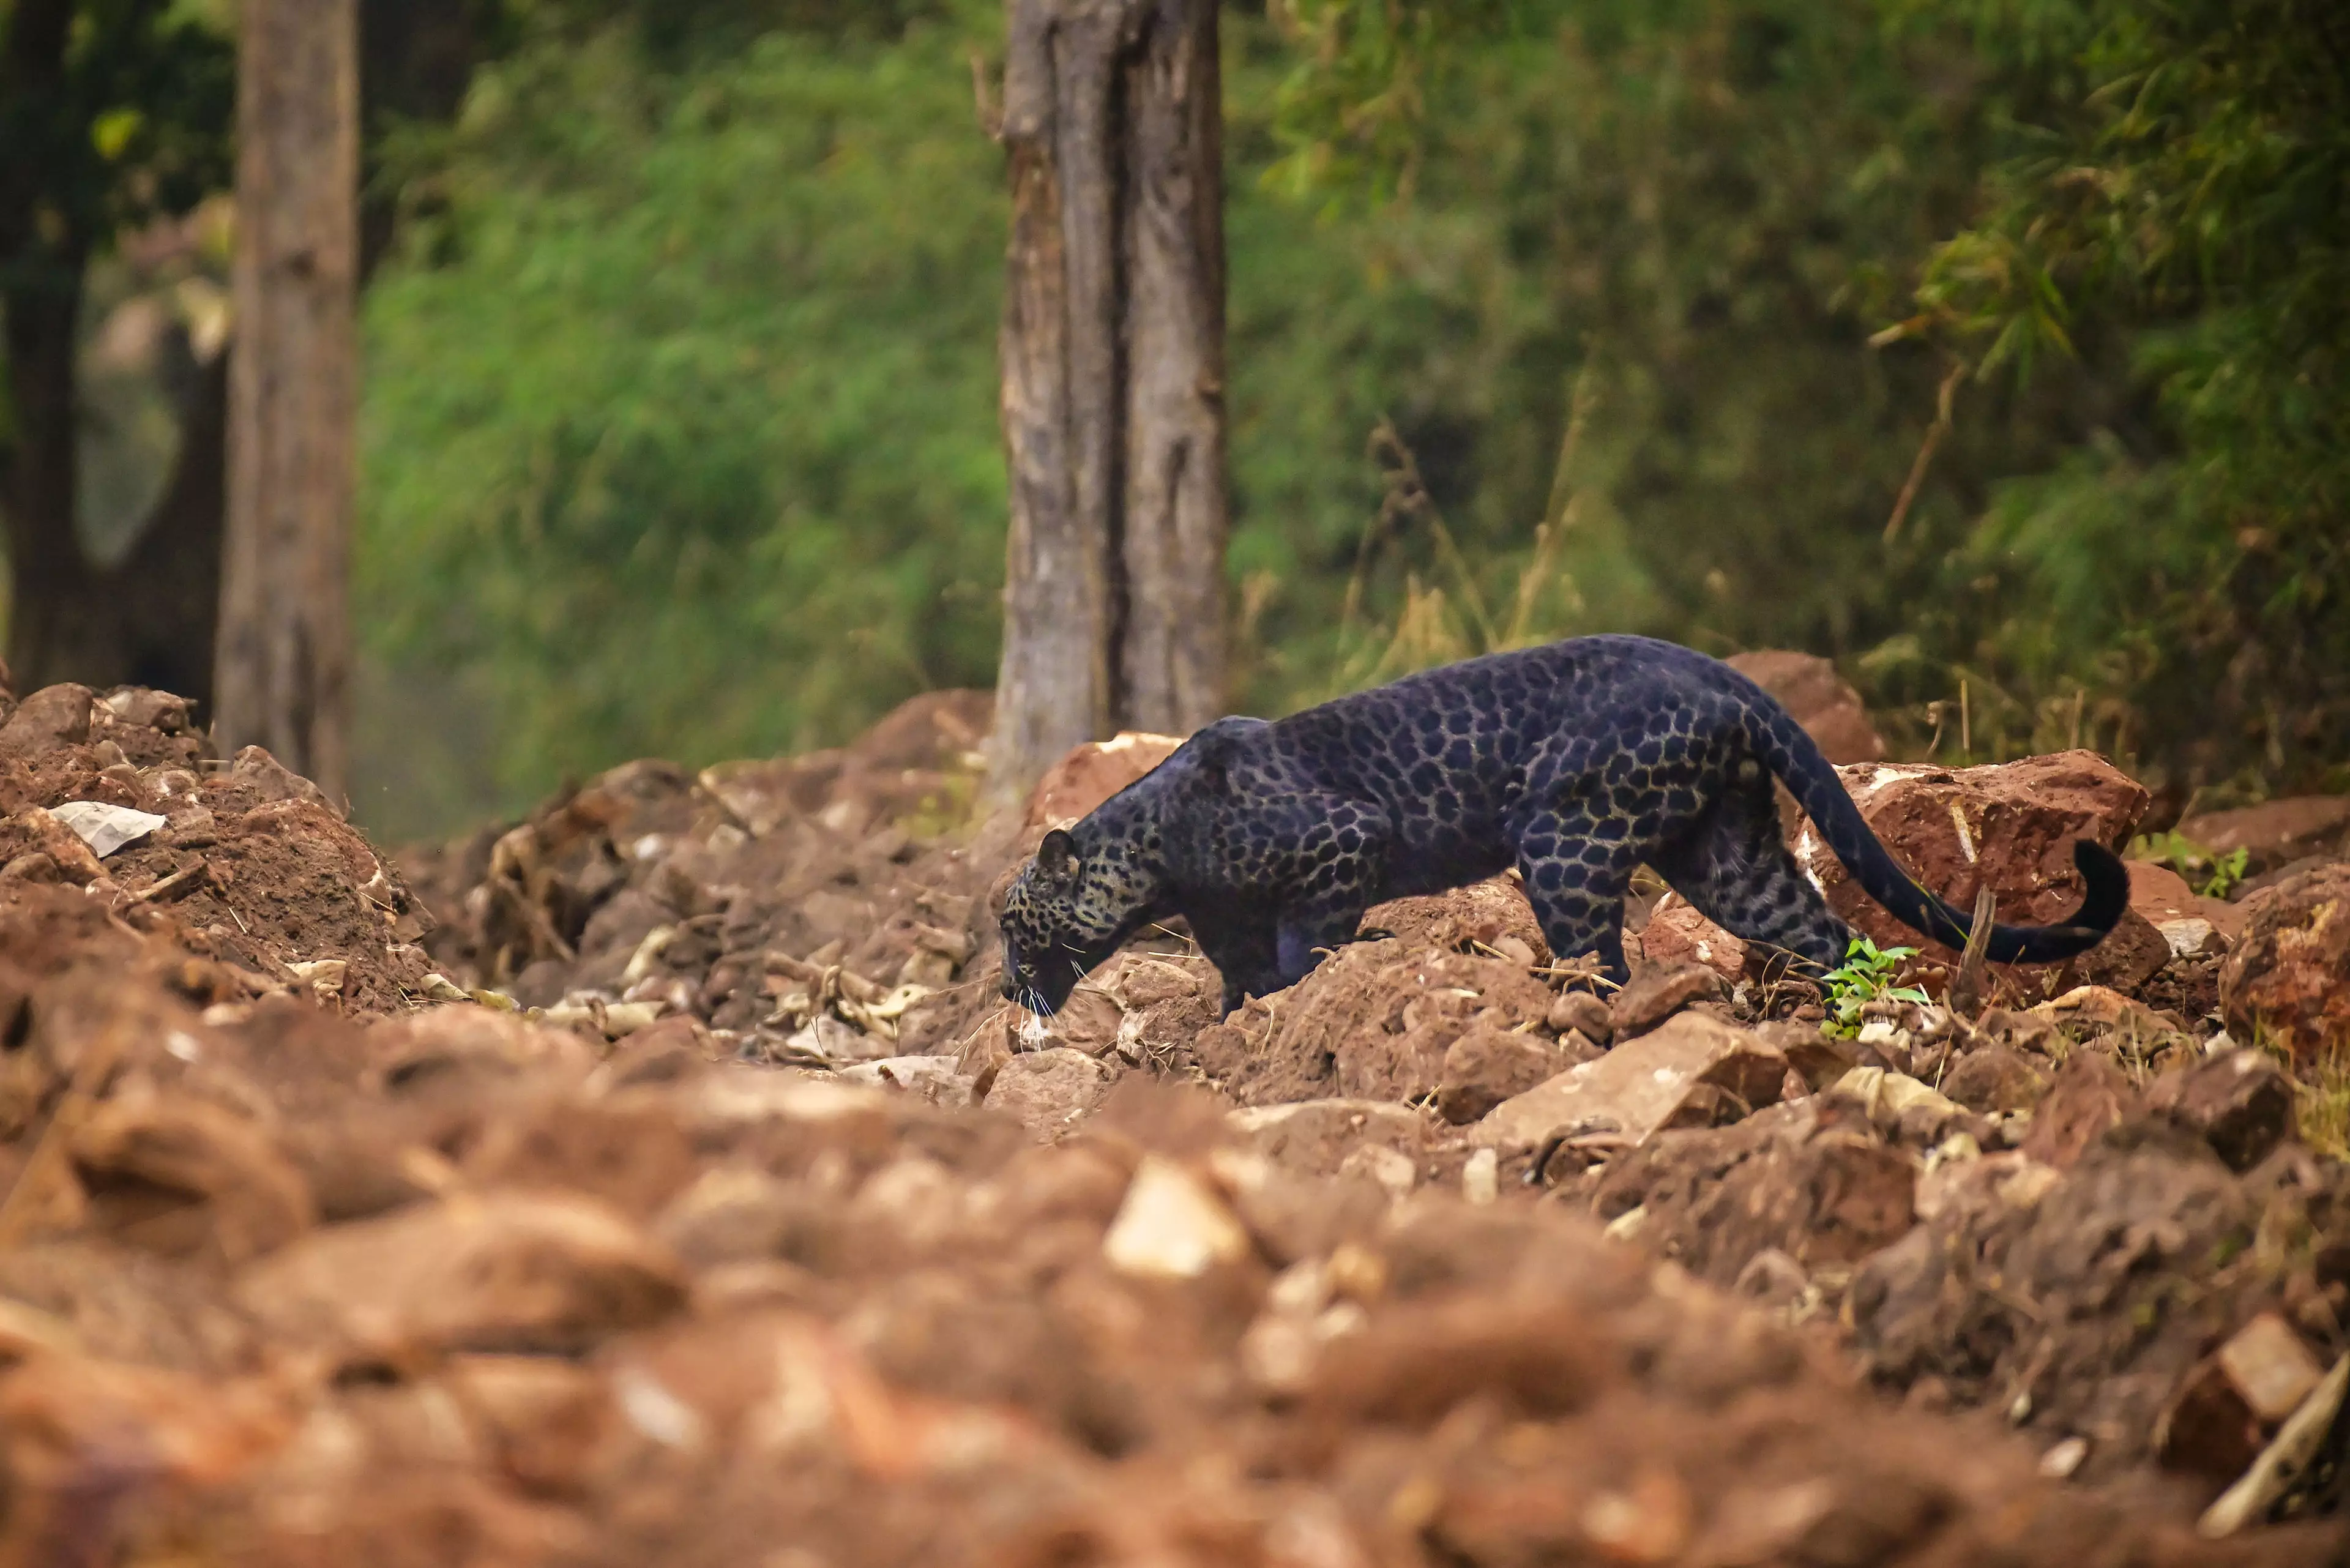 Rare Black Leopard Is Spotted Hunting In Indian National Park